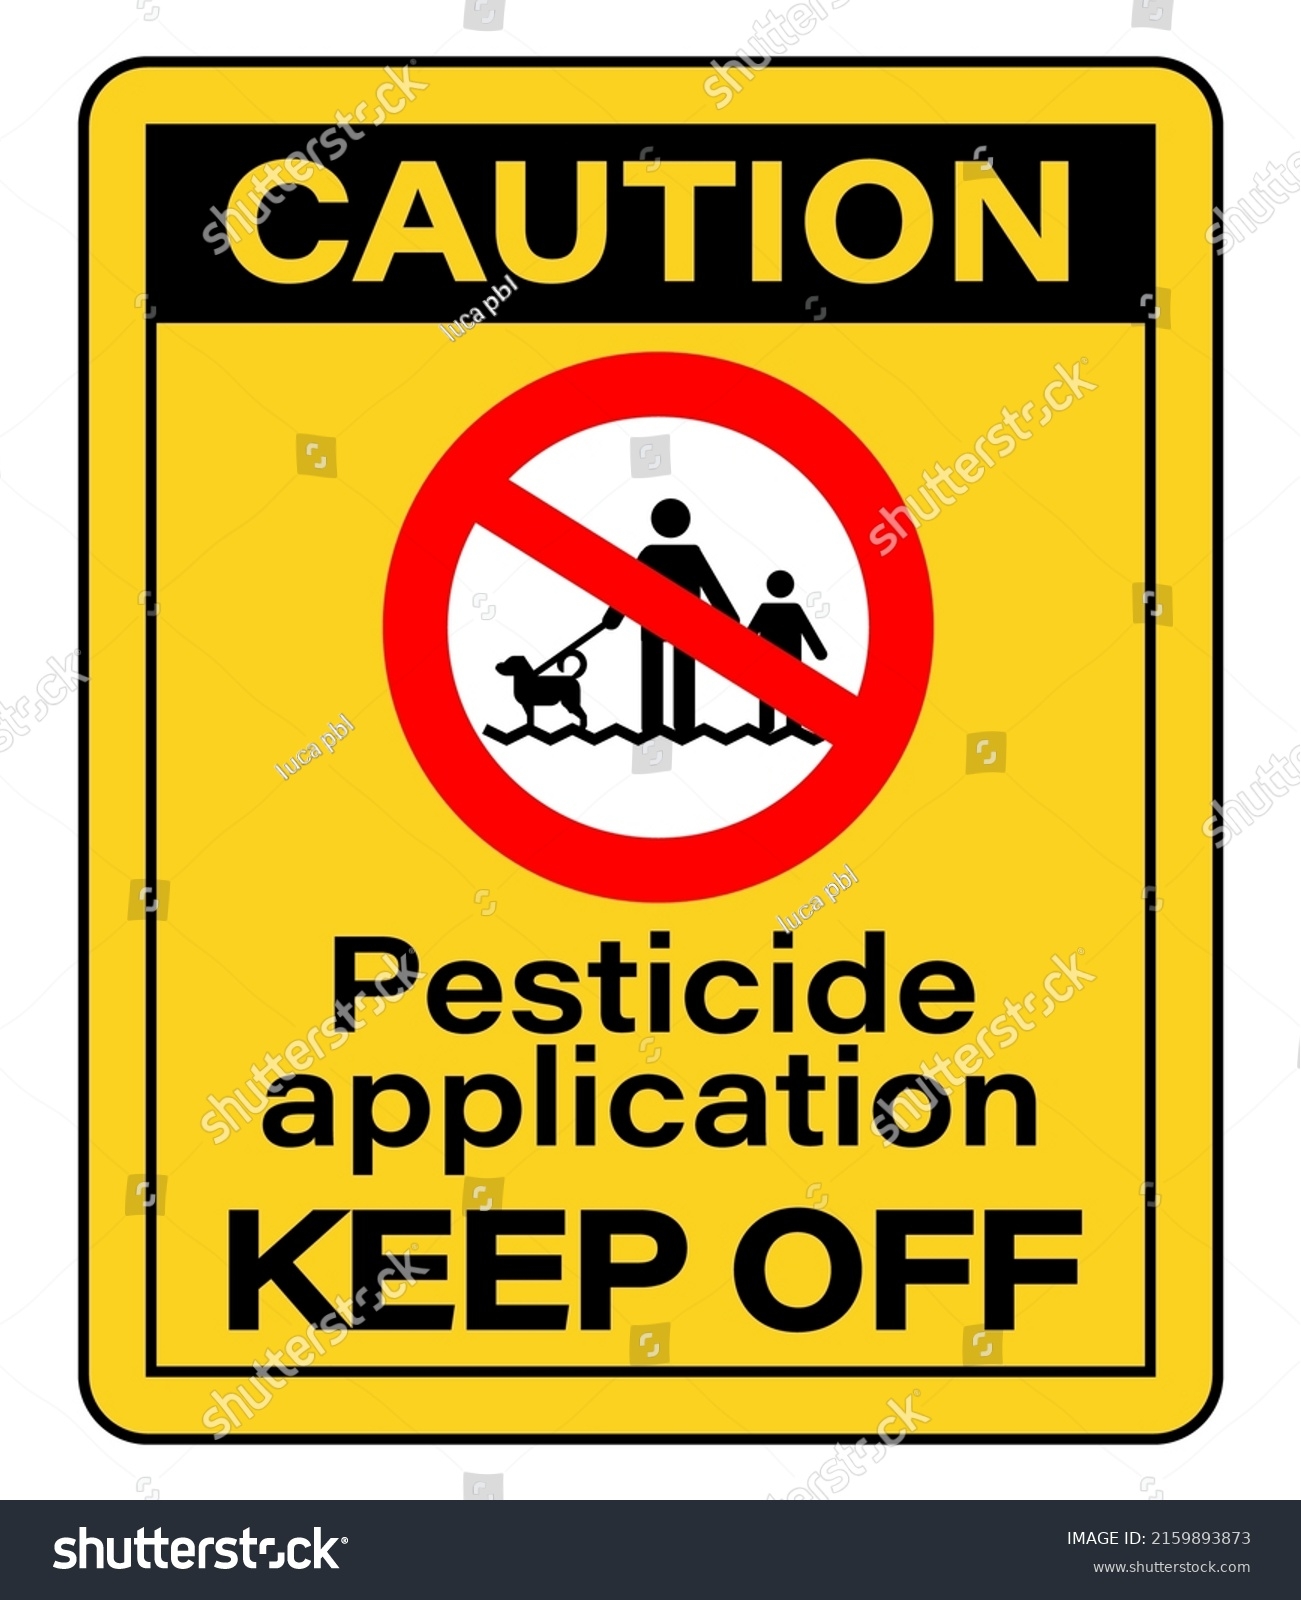 Caution Pesticide Applications Keep Off Warning Stock Vector Royalty Free 2159893873 Shutterstock